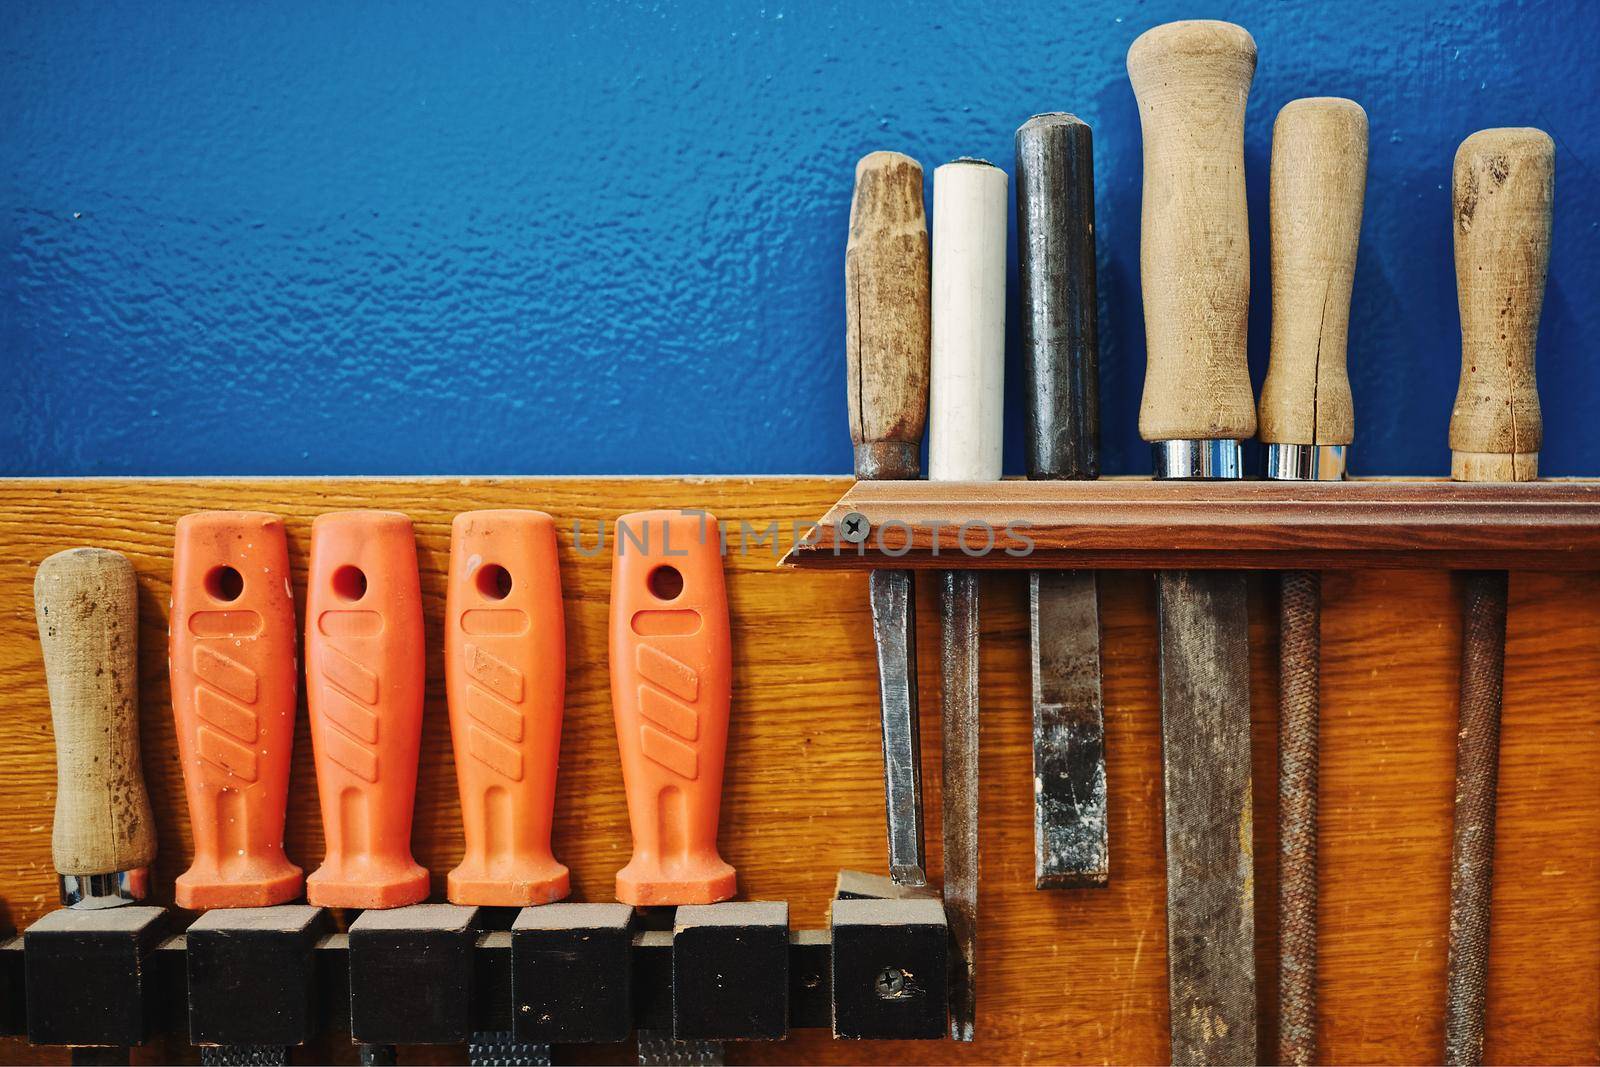 The carpenter's tools hang neatly on the wall. Workplace order. Rashpil, file and chisel close-up. Copy space.